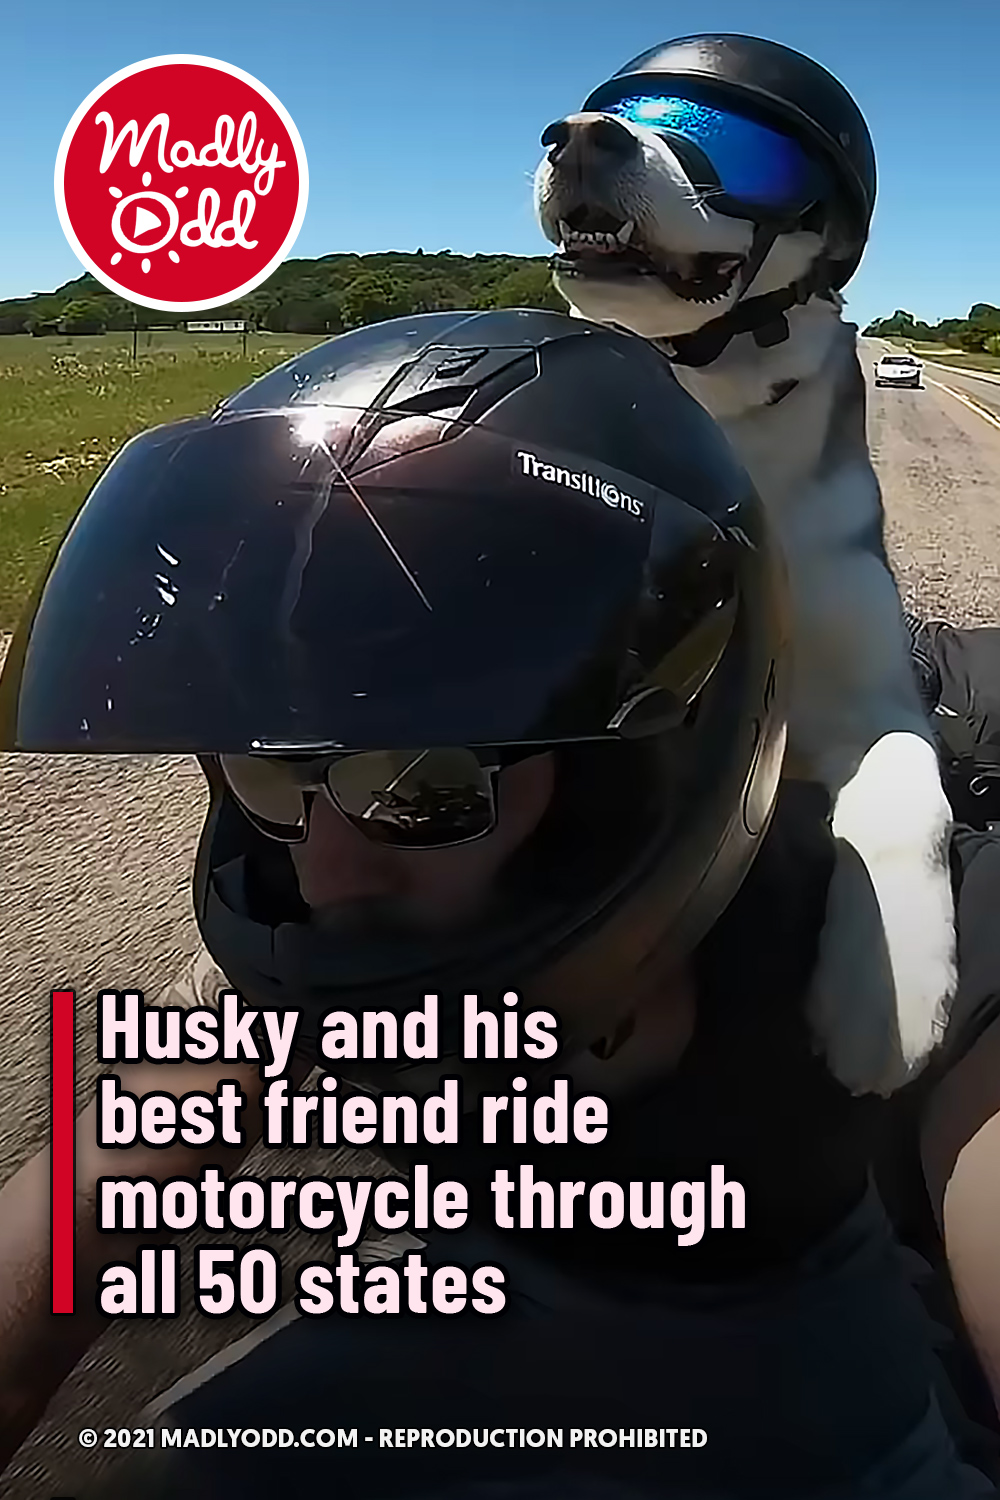 Husky and his best friend ride motorcycle through all 50 states